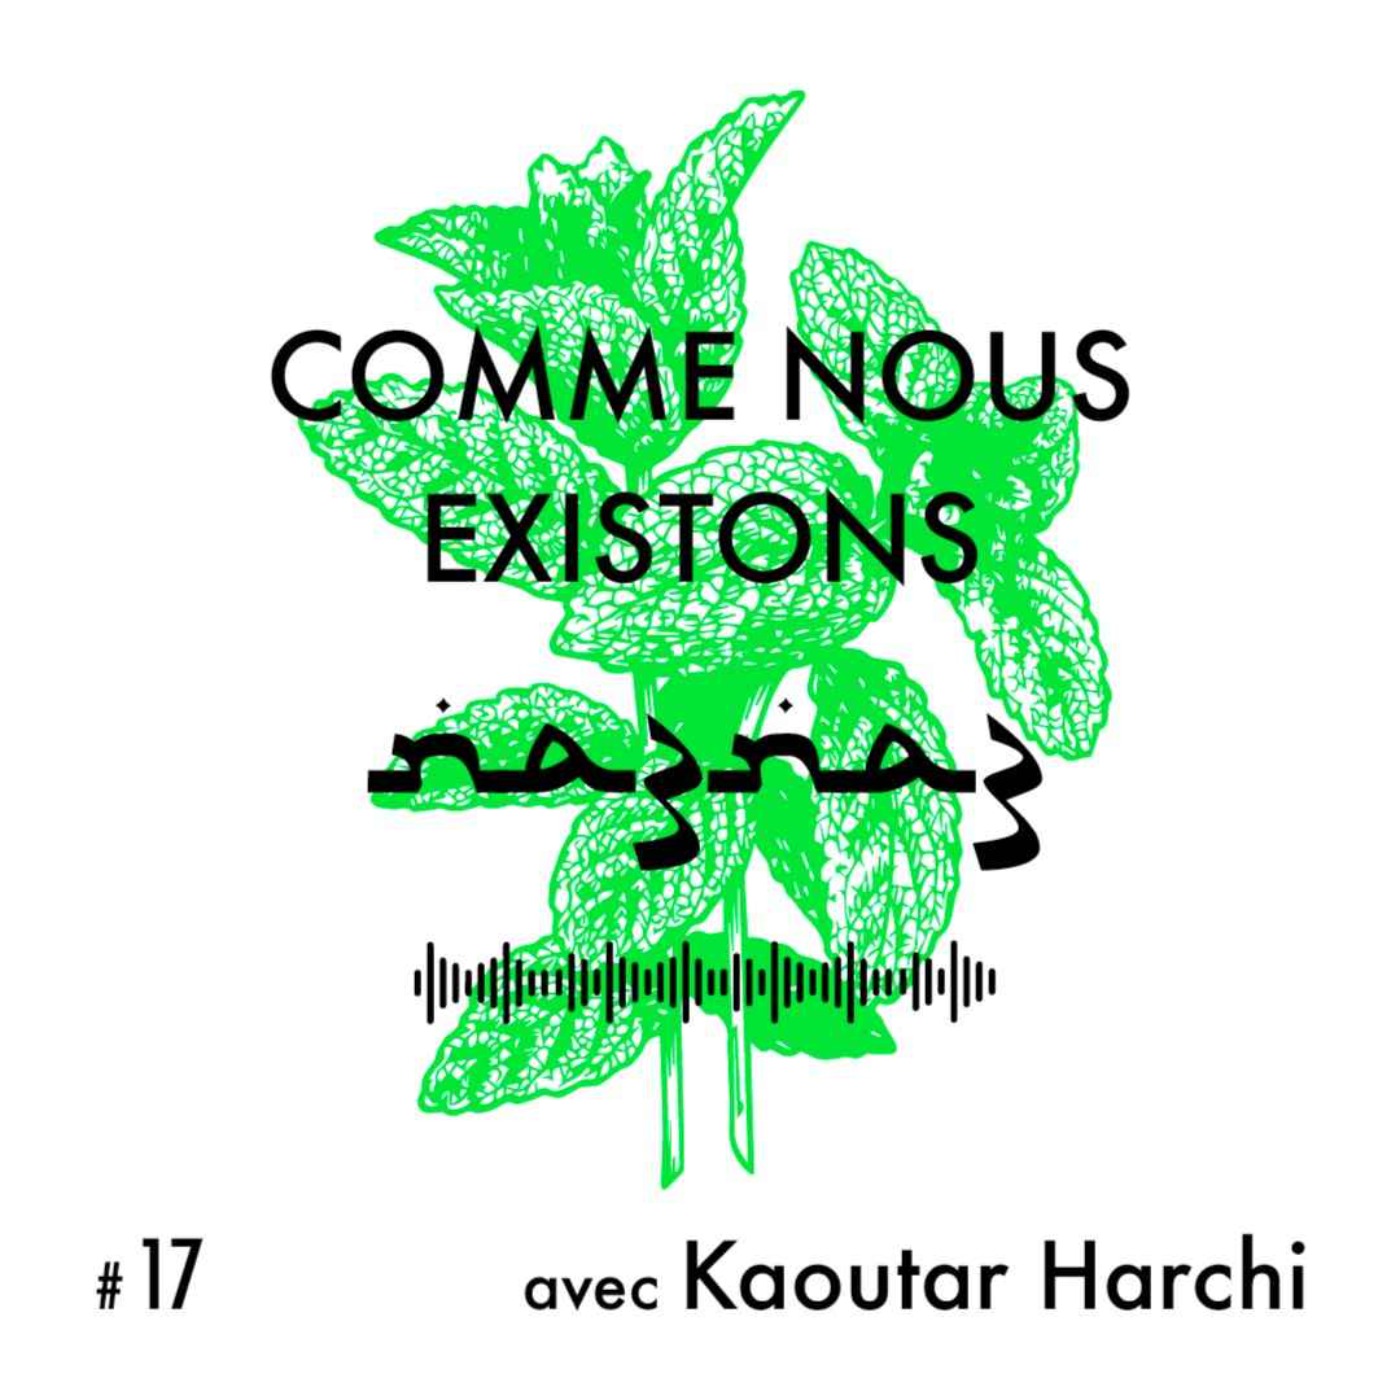 na3na3 #17 | Comme nous existons, avec Kaoutar Harchi